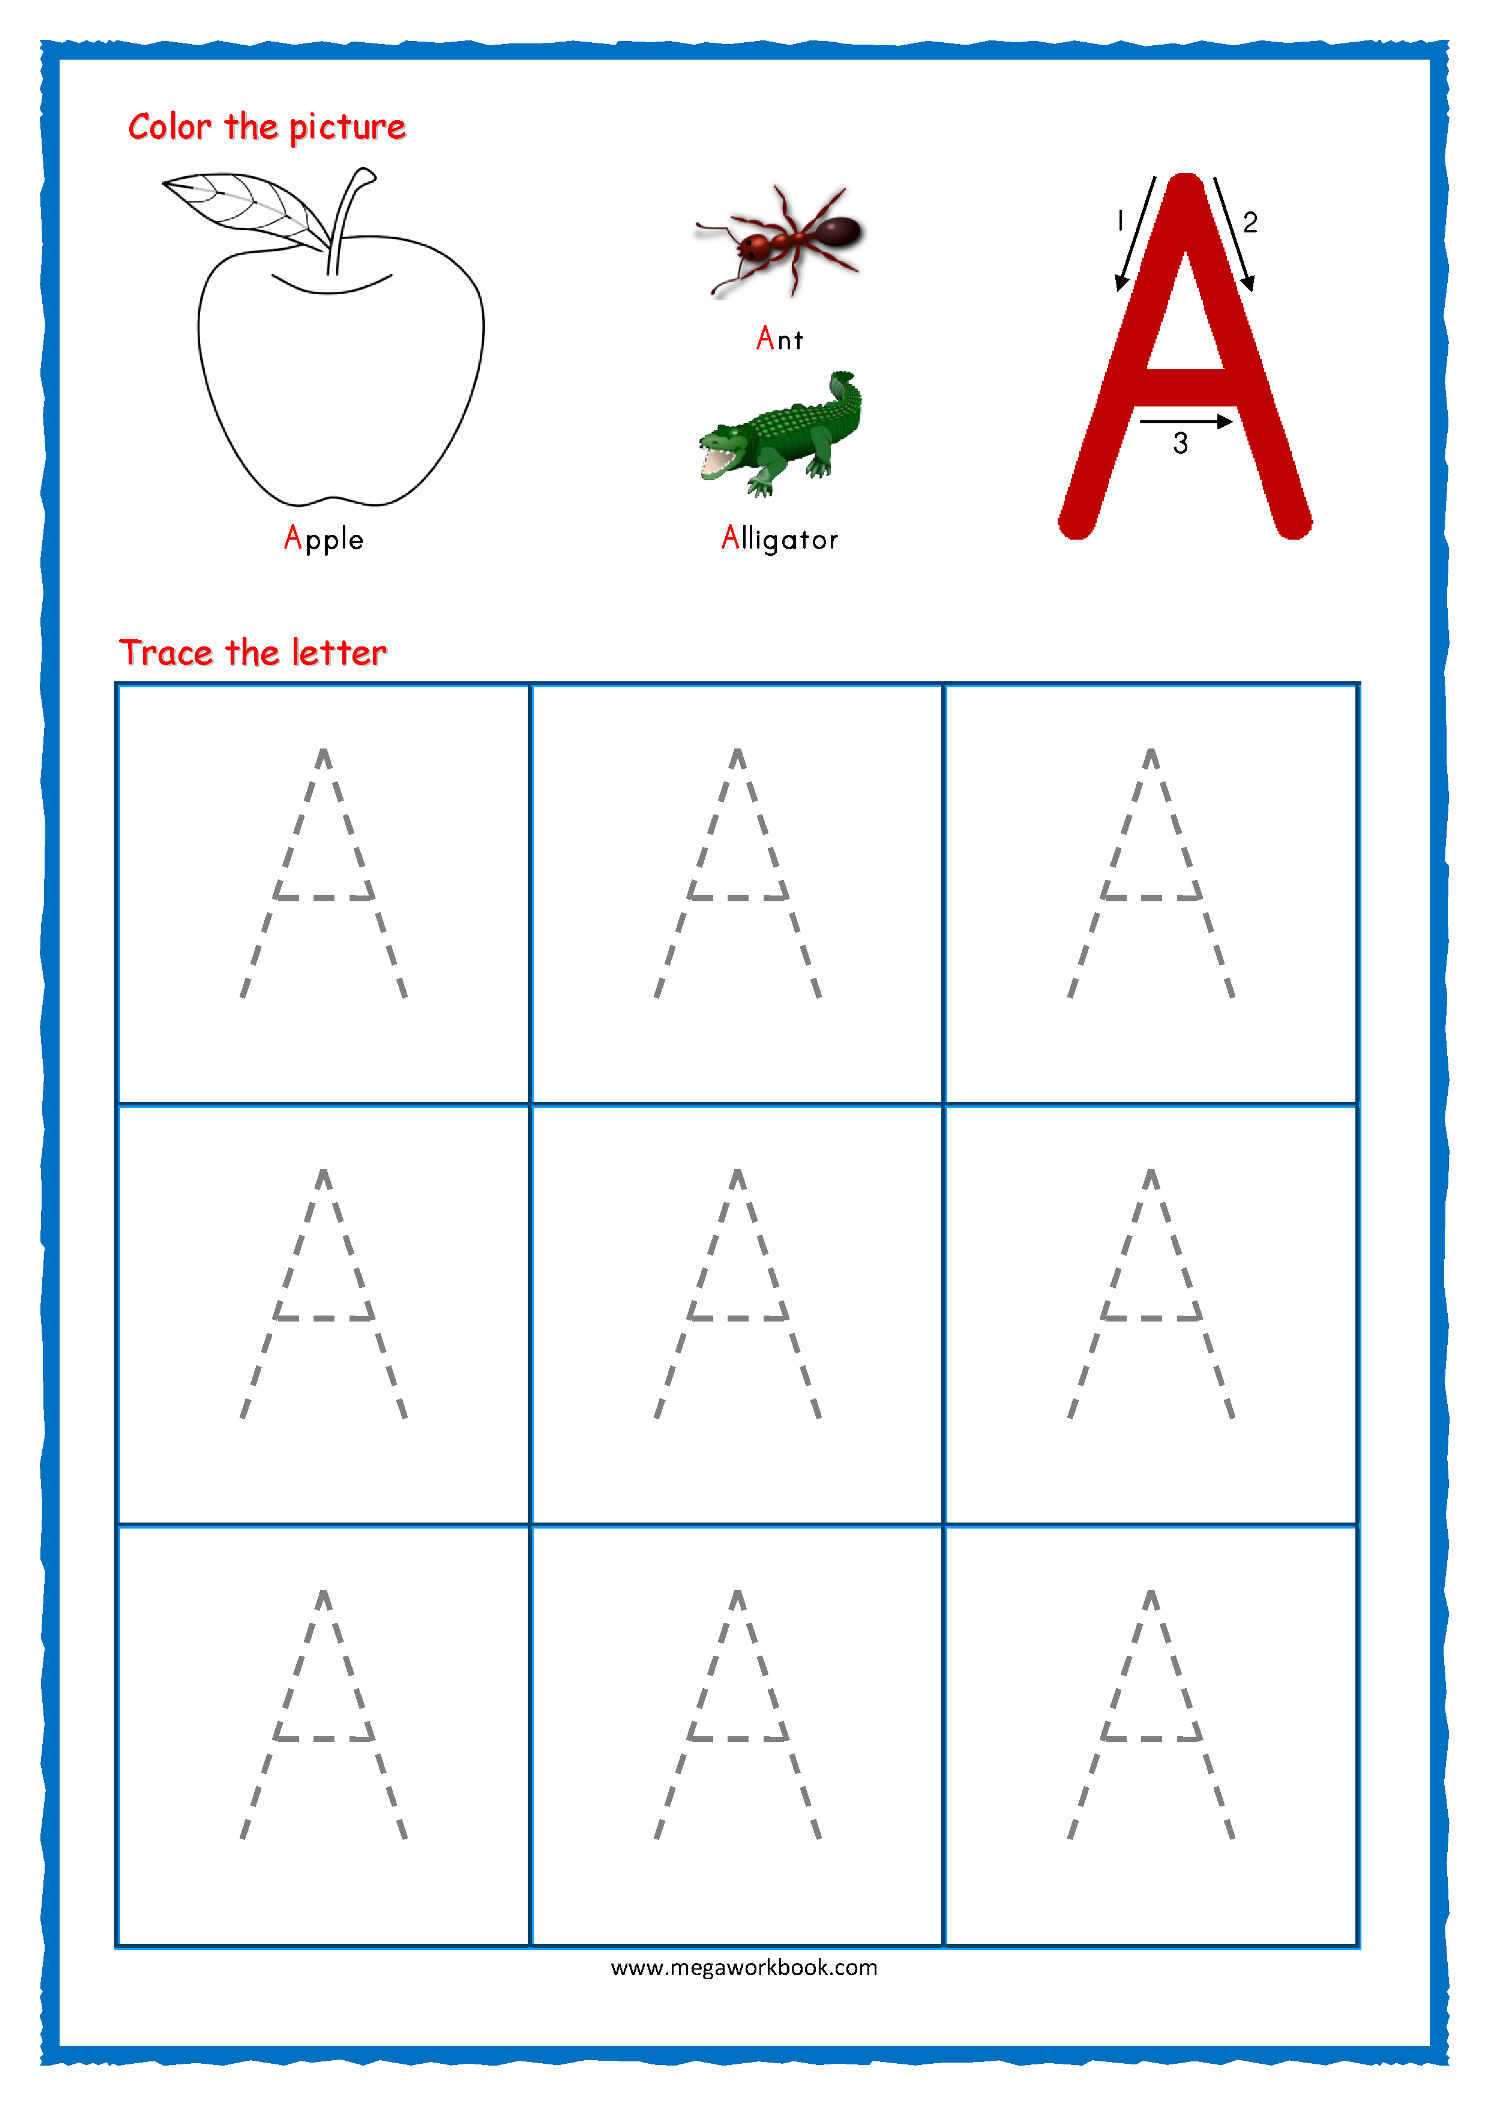 Coloring Book : Coloring Book Alphabet Tracing Worksheets regarding A Letter Tracing Worksheet